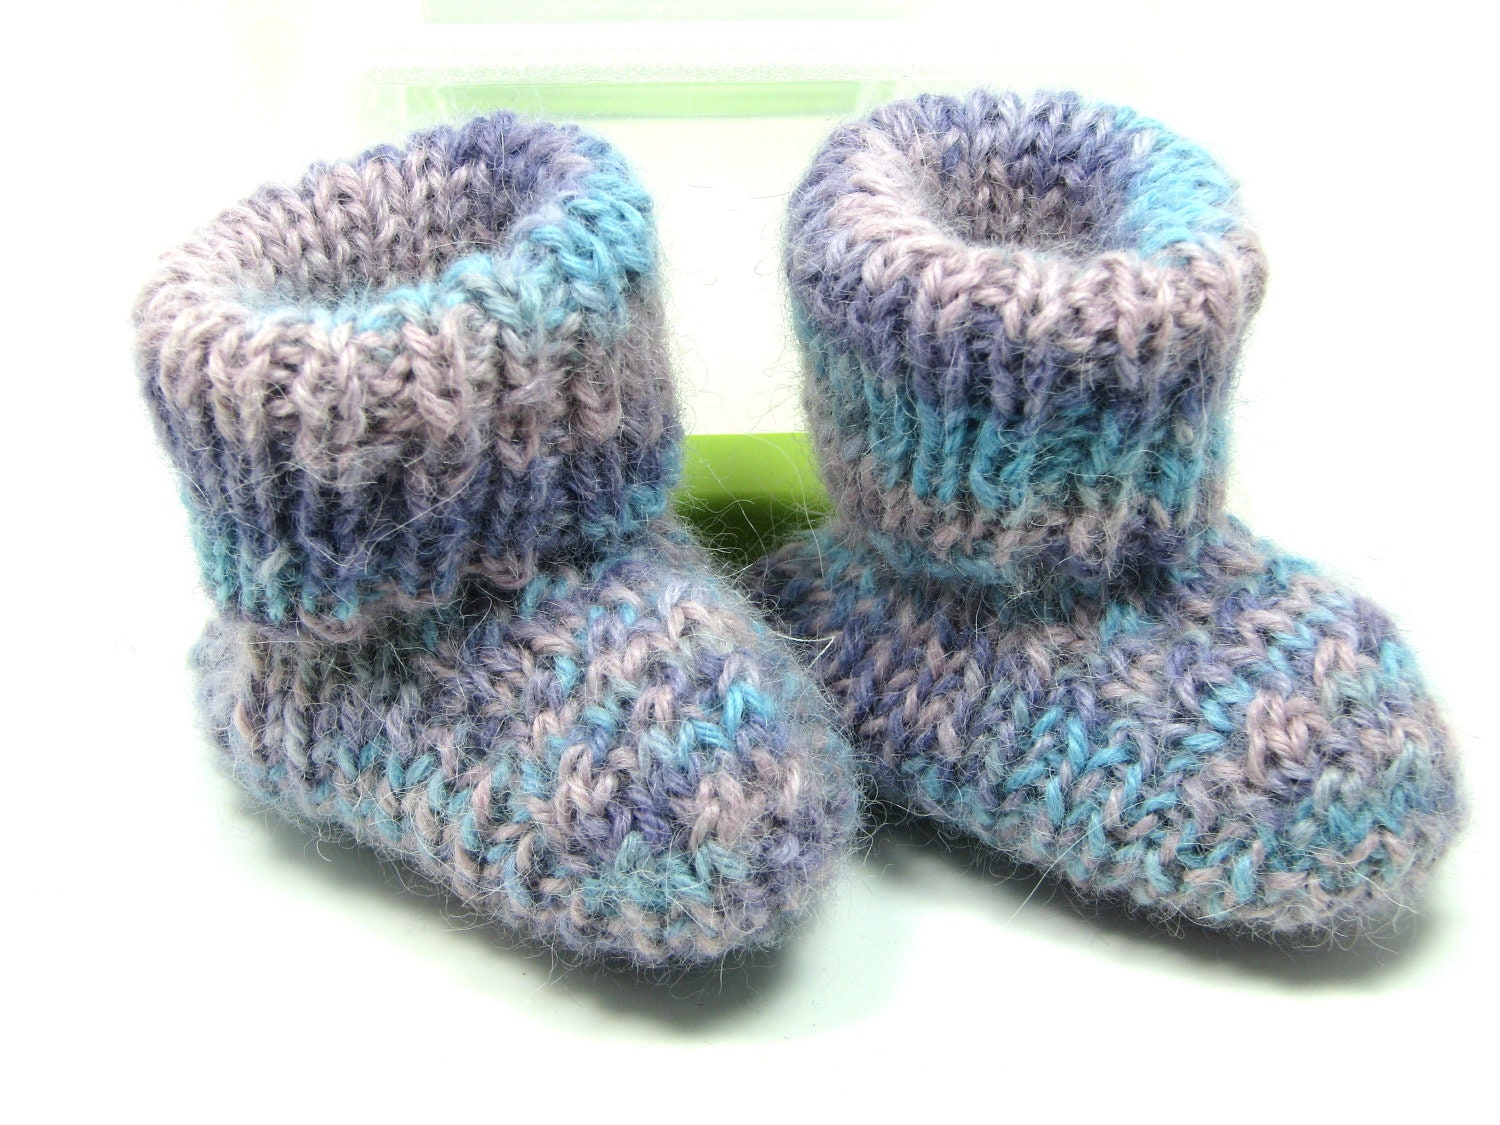 Knitted Alpaca Baby Booties Pink Lavender Blue Stripes 0-6 mos - jenandoles